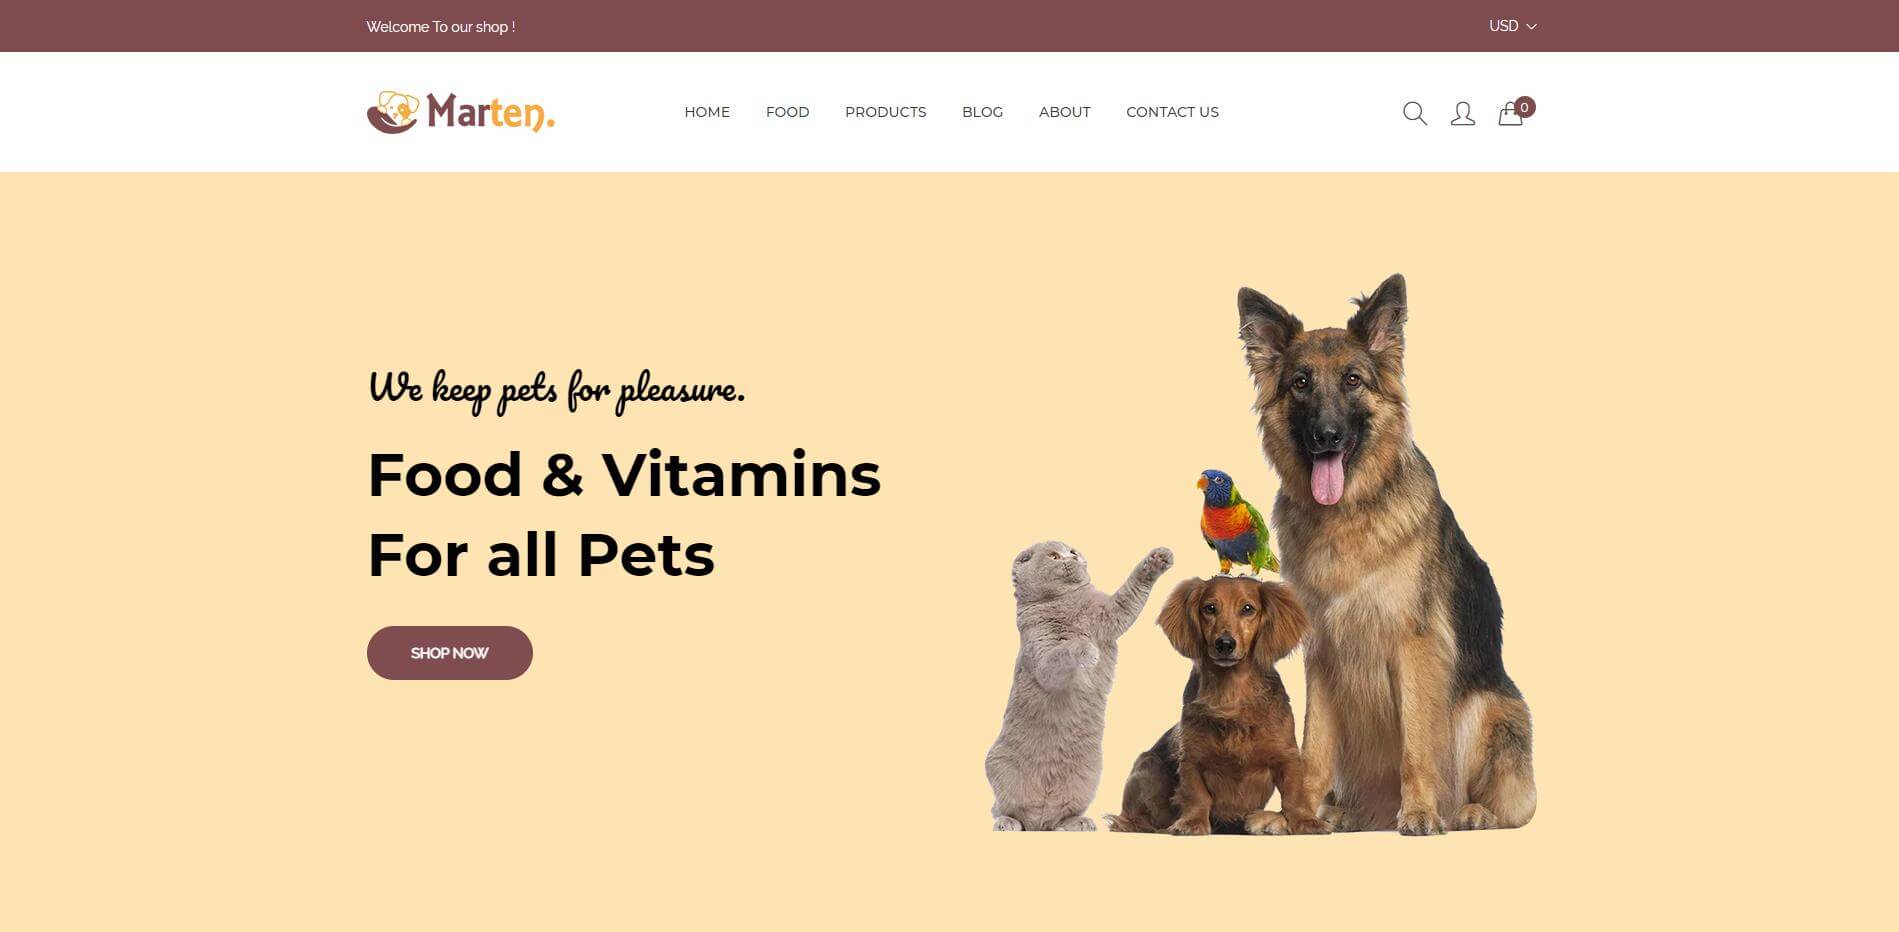 Gain an edge over your rivals with Marten, an eCommerce-ready theme that is sure to sets your pet store apart from the crowd!